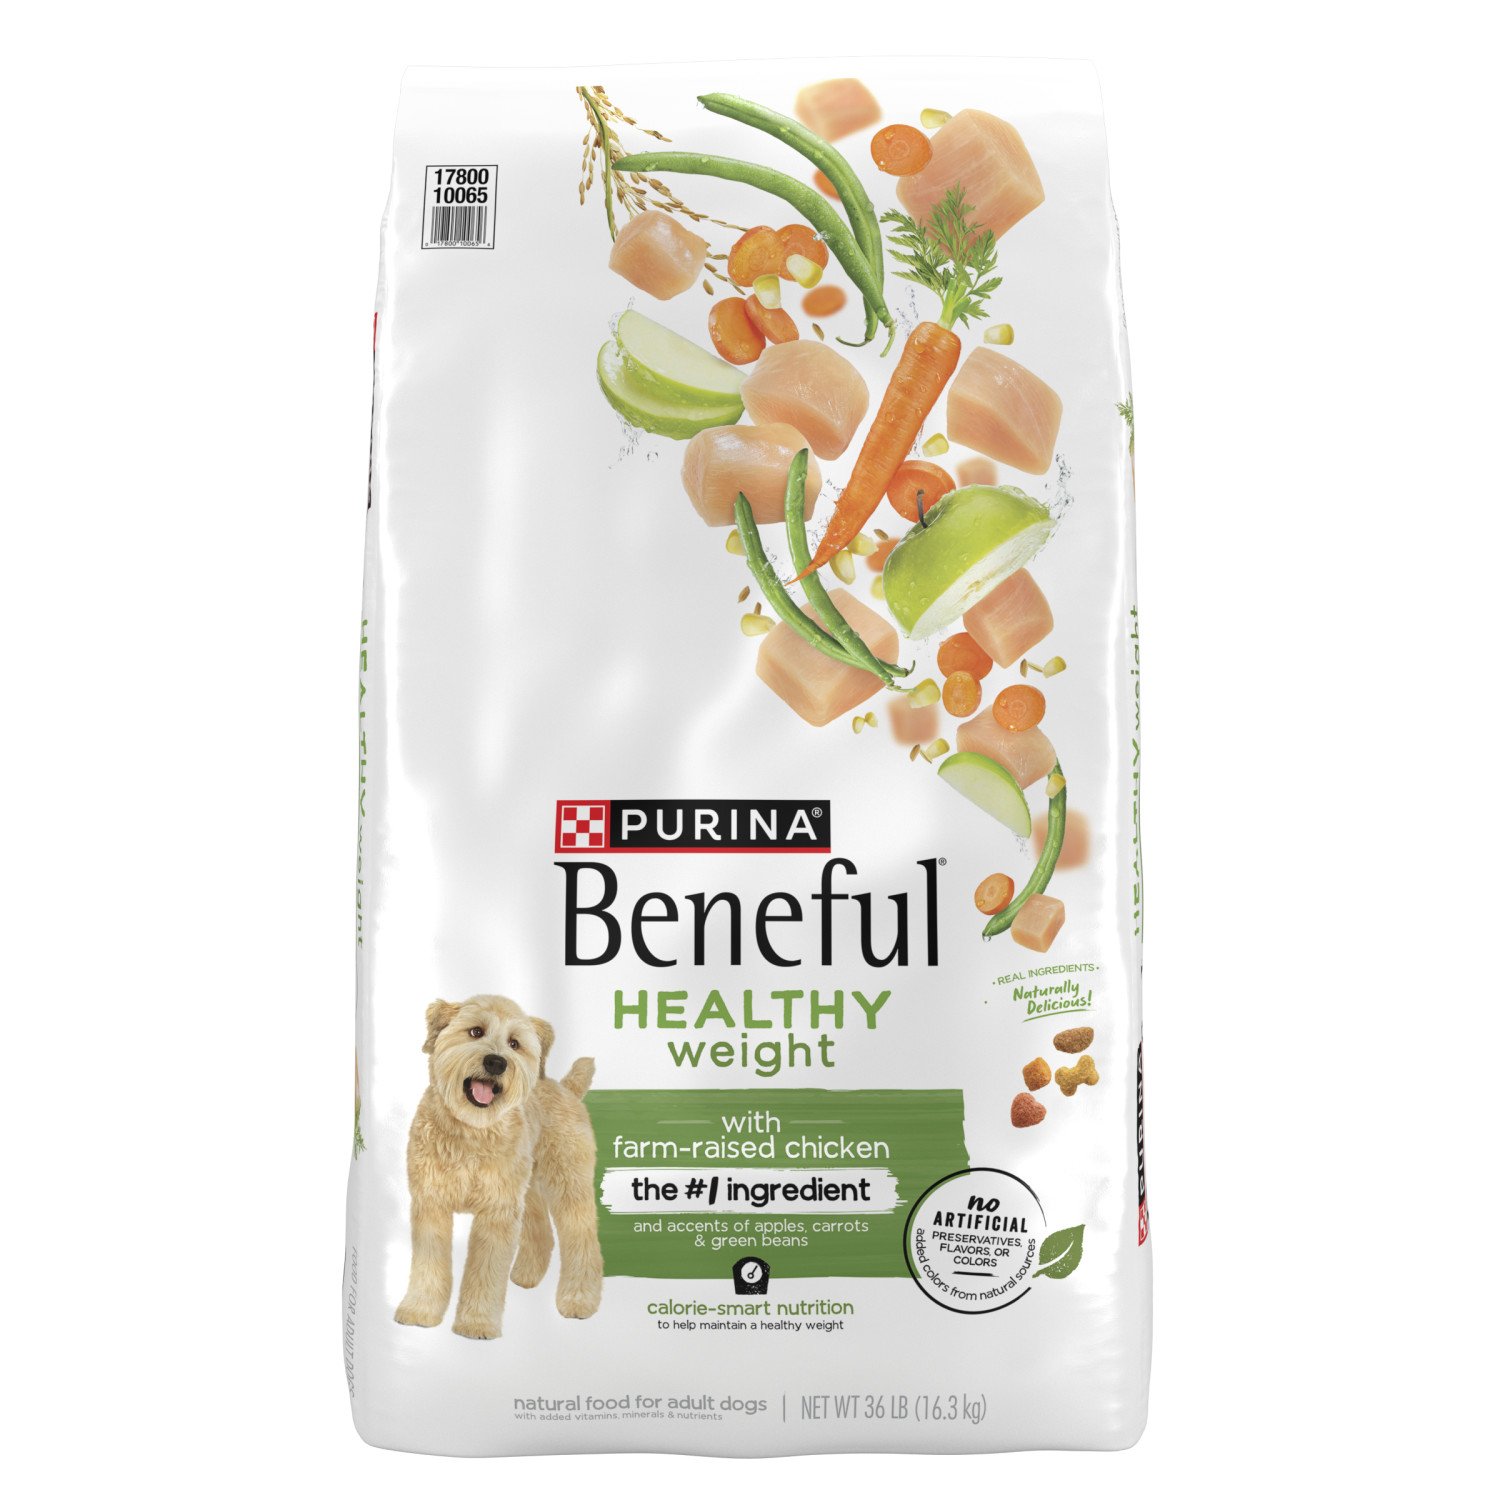 Purina Beneful Healthy Weight Dry Dog Food Shop Dogs at